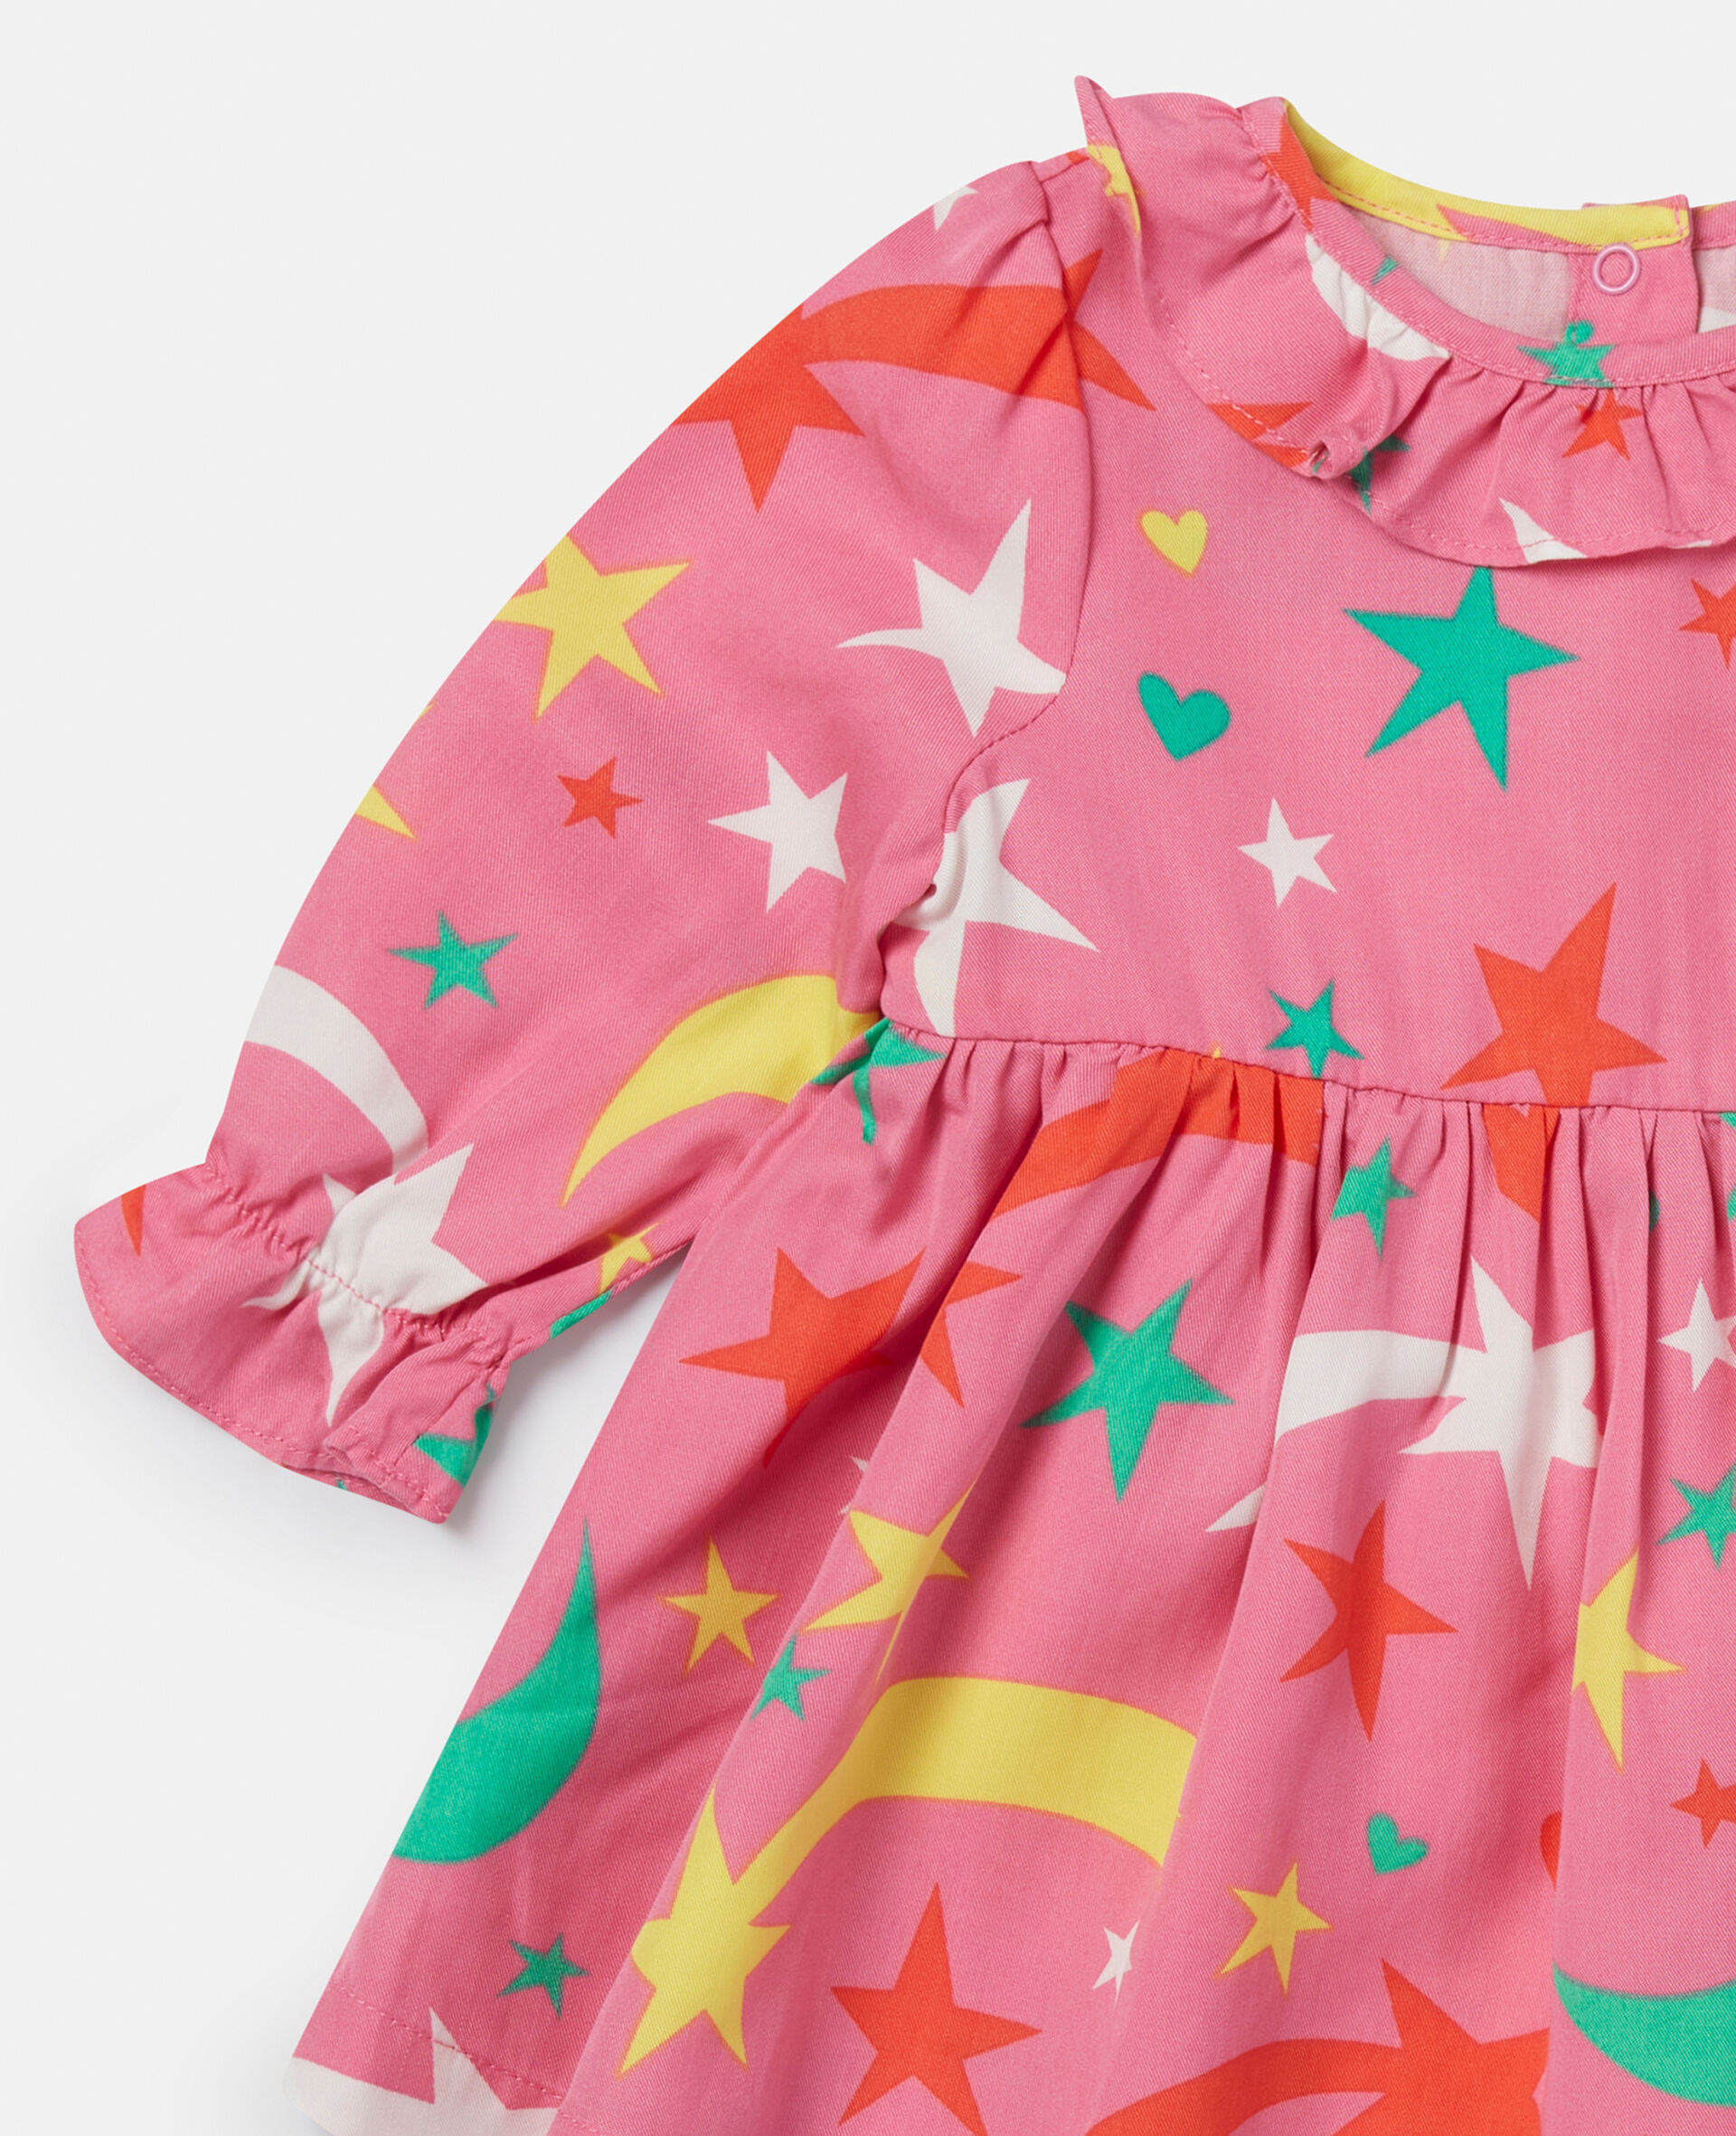 Shooting Star Print Twill Dress-Pink-large image number 1